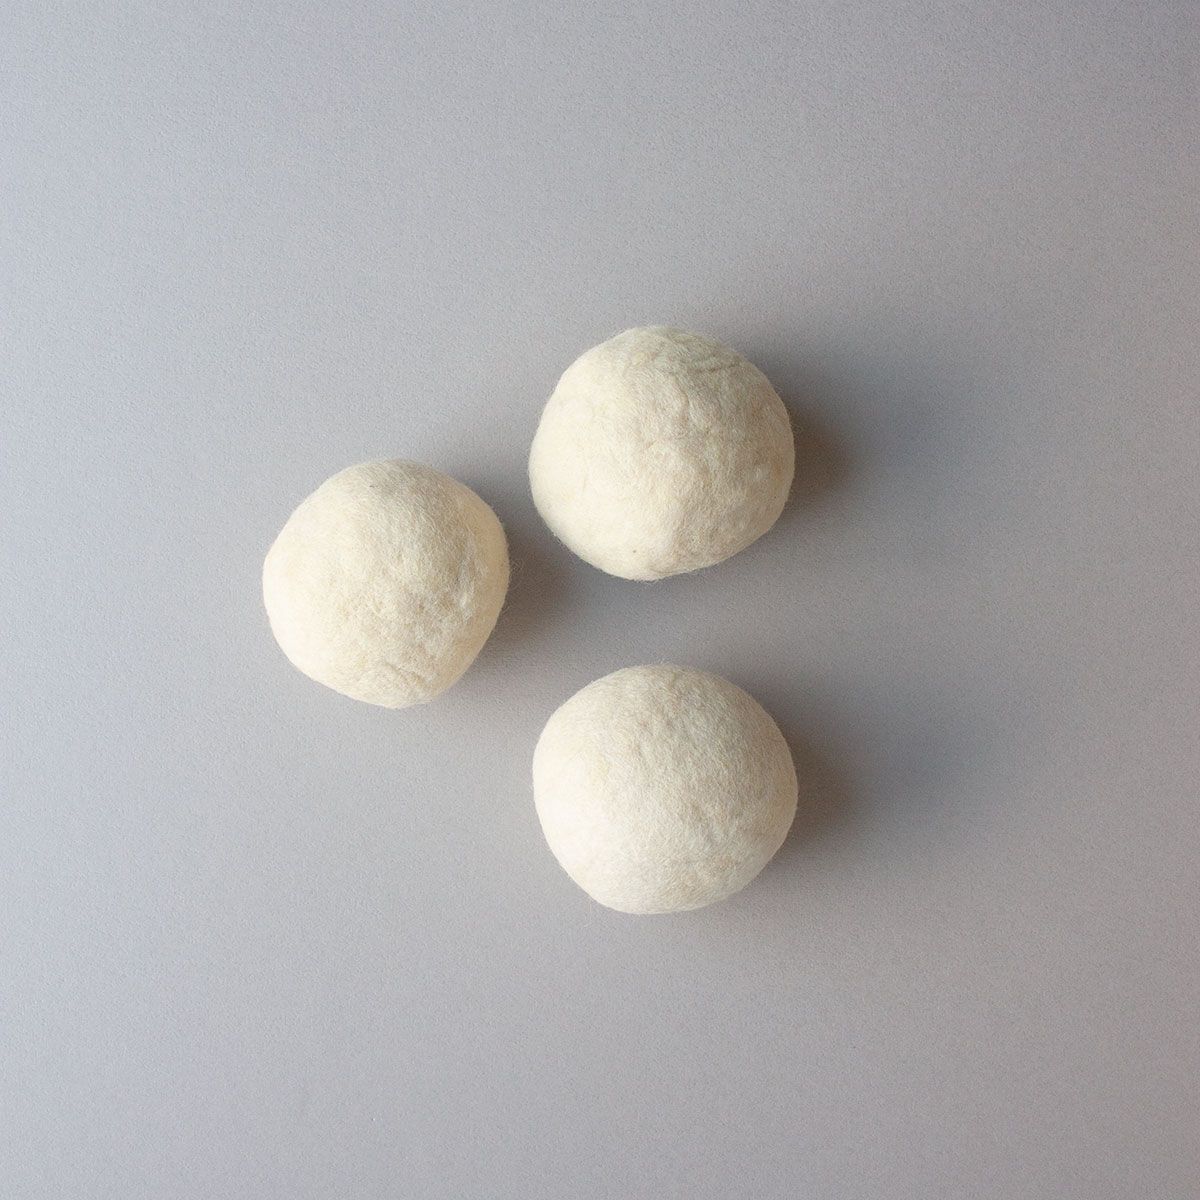 Three white felted wool dryer balls are arranged in a triangle on top of a gray background.